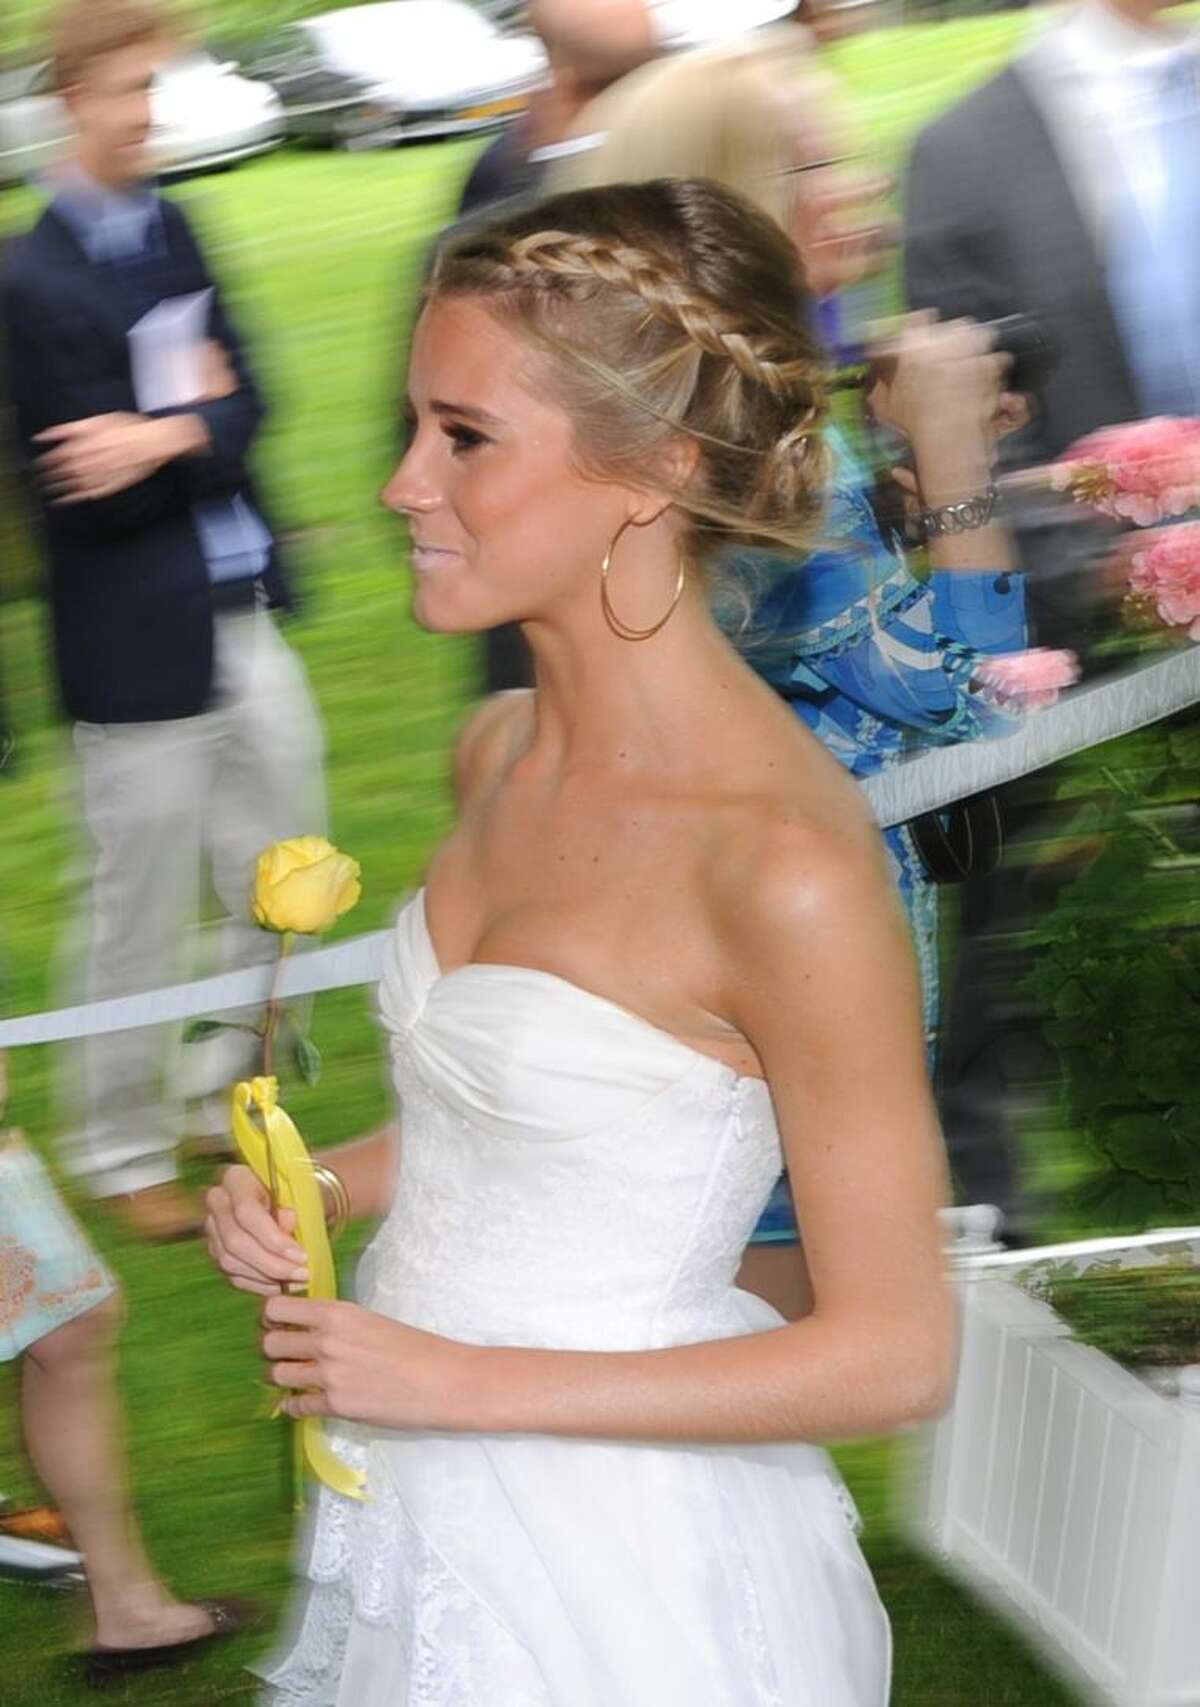 Cassidy Gifford during the Greenwich Academy Graduation at the main campus in Greenwich, Thursday, May 24, 2012.